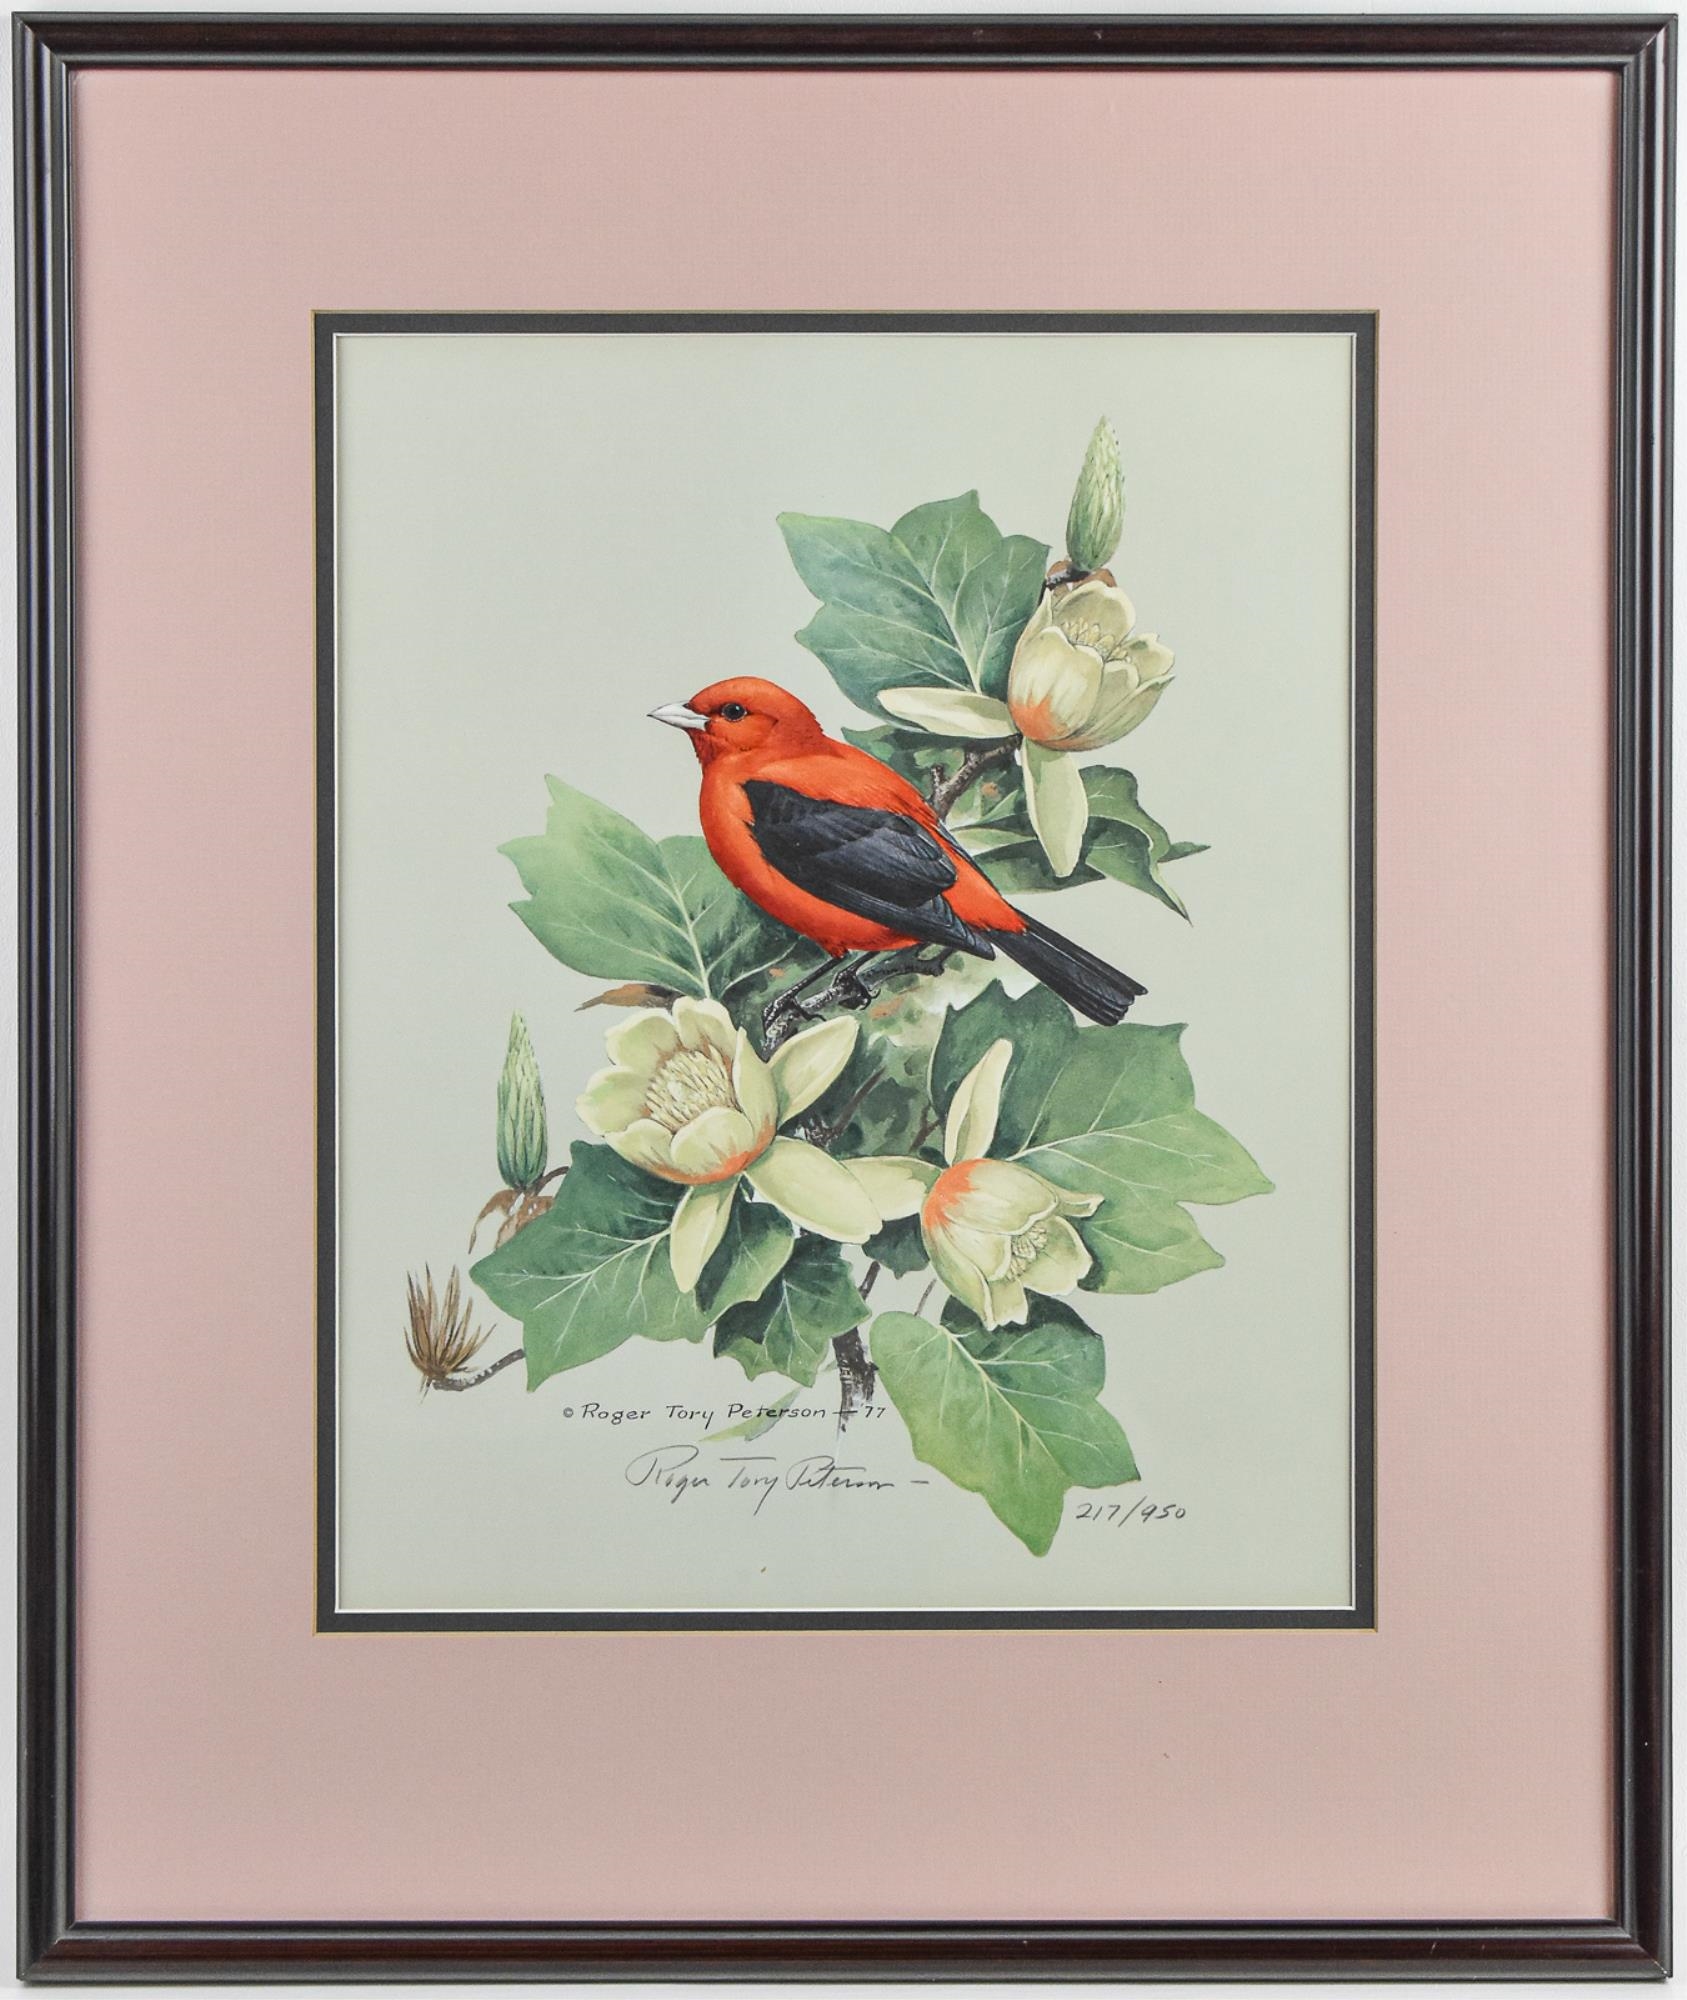 "SCARLET TANAGER" by Roger Tory Peterson, 1977